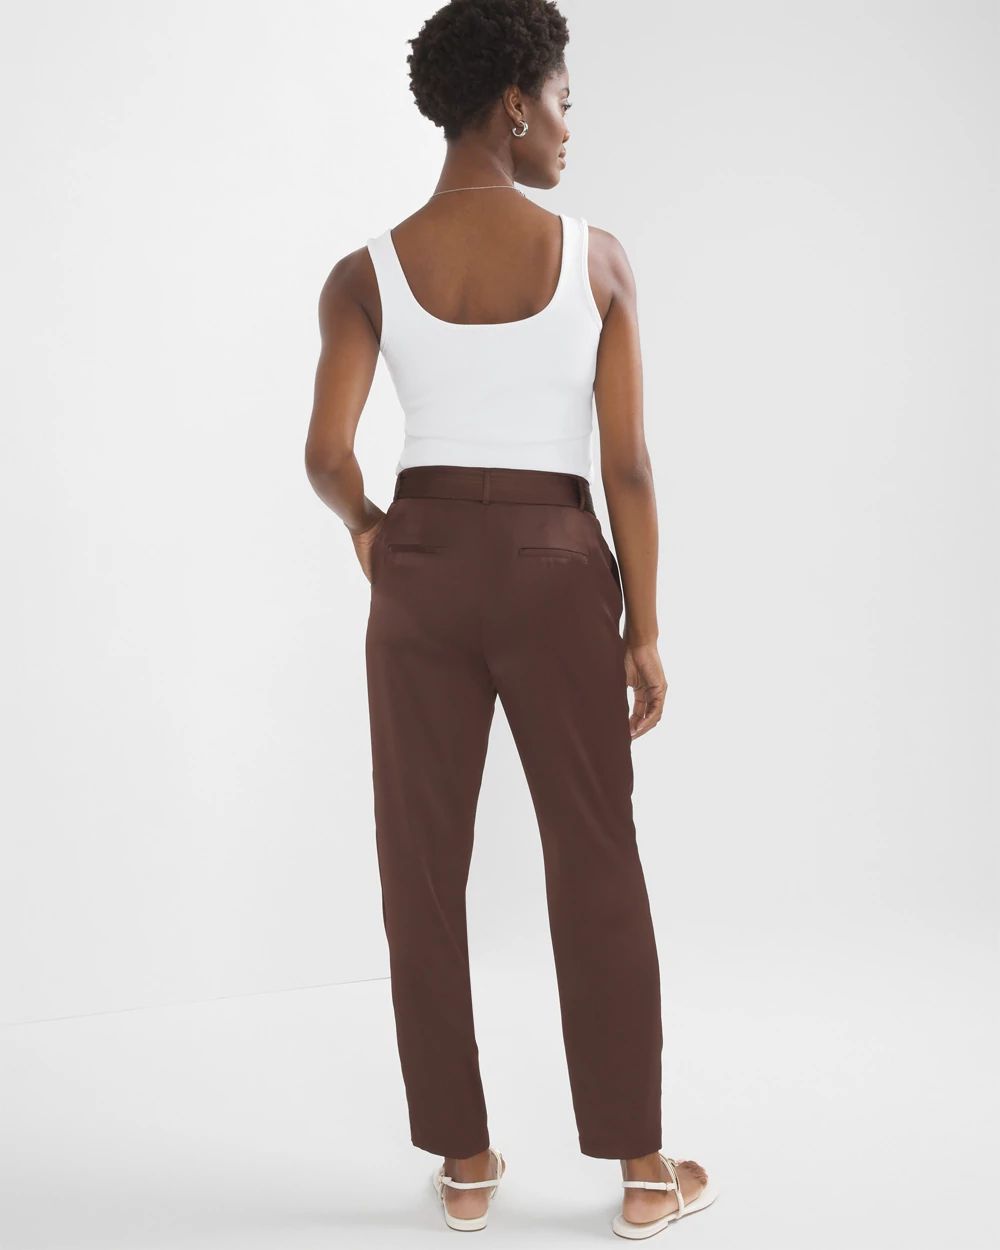 Belted Utility Straight Crop Pants click to view larger image.